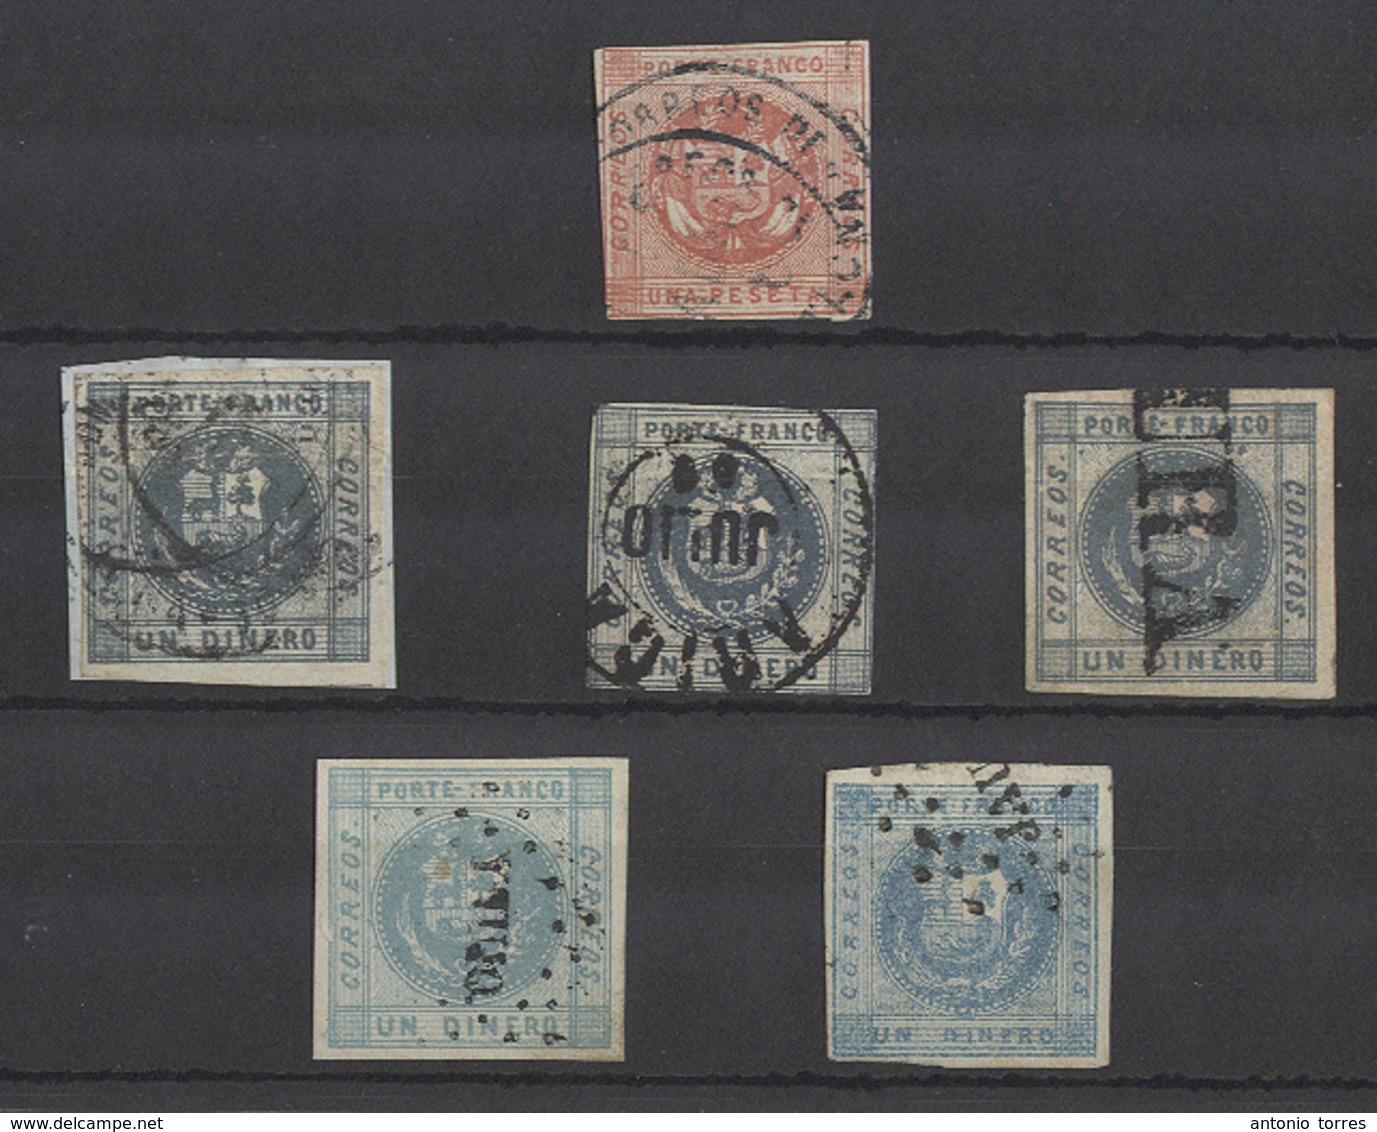 PERU. 1858. Selection Of 6 Diff Cancels Diff Shades About Fine. Nice Group. - Perù